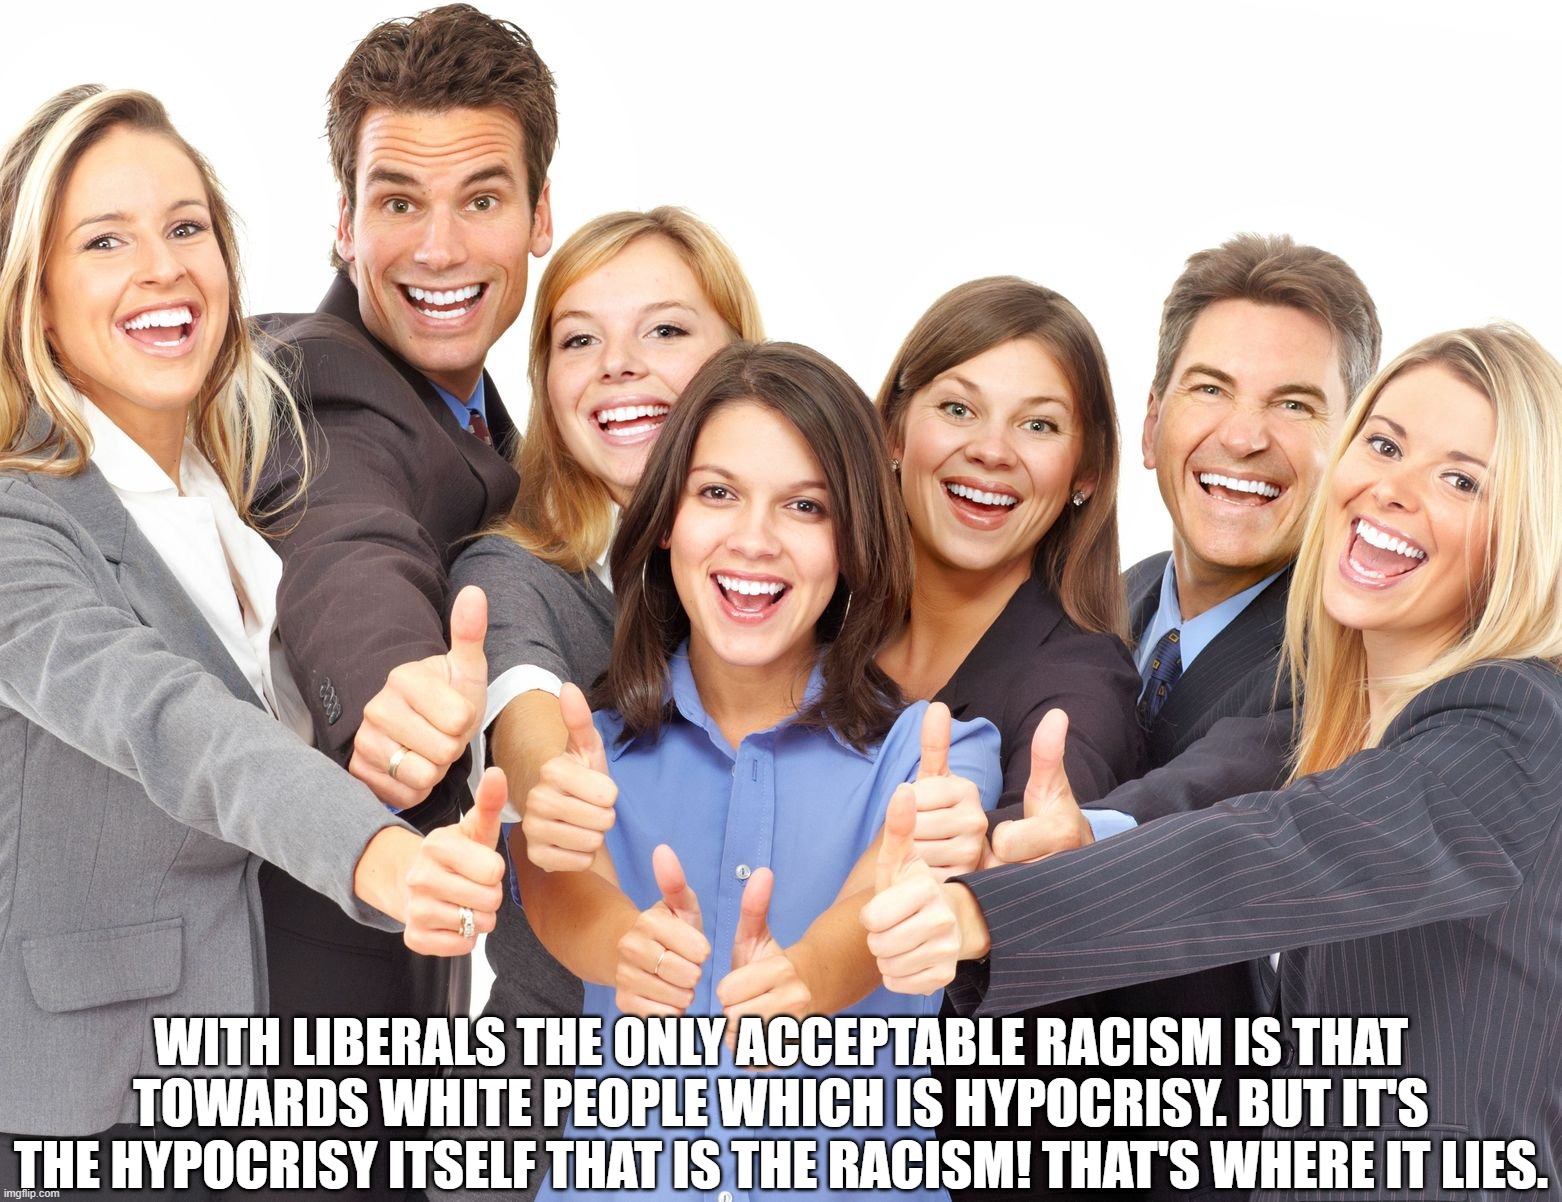 Antiwhite Hypocrisy | WITH LIBERALS THE ONLY ACCEPTABLE RACISM IS THAT TOWARDS WHITE PEOPLE WHICH IS HYPOCRISY. BUT IT'S THE HYPOCRISY ITSELF THAT IS THE RACISM! THAT'S WHERE IT LIES. | image tagged in white people,racist liberals,awful | made w/ Imgflip meme maker